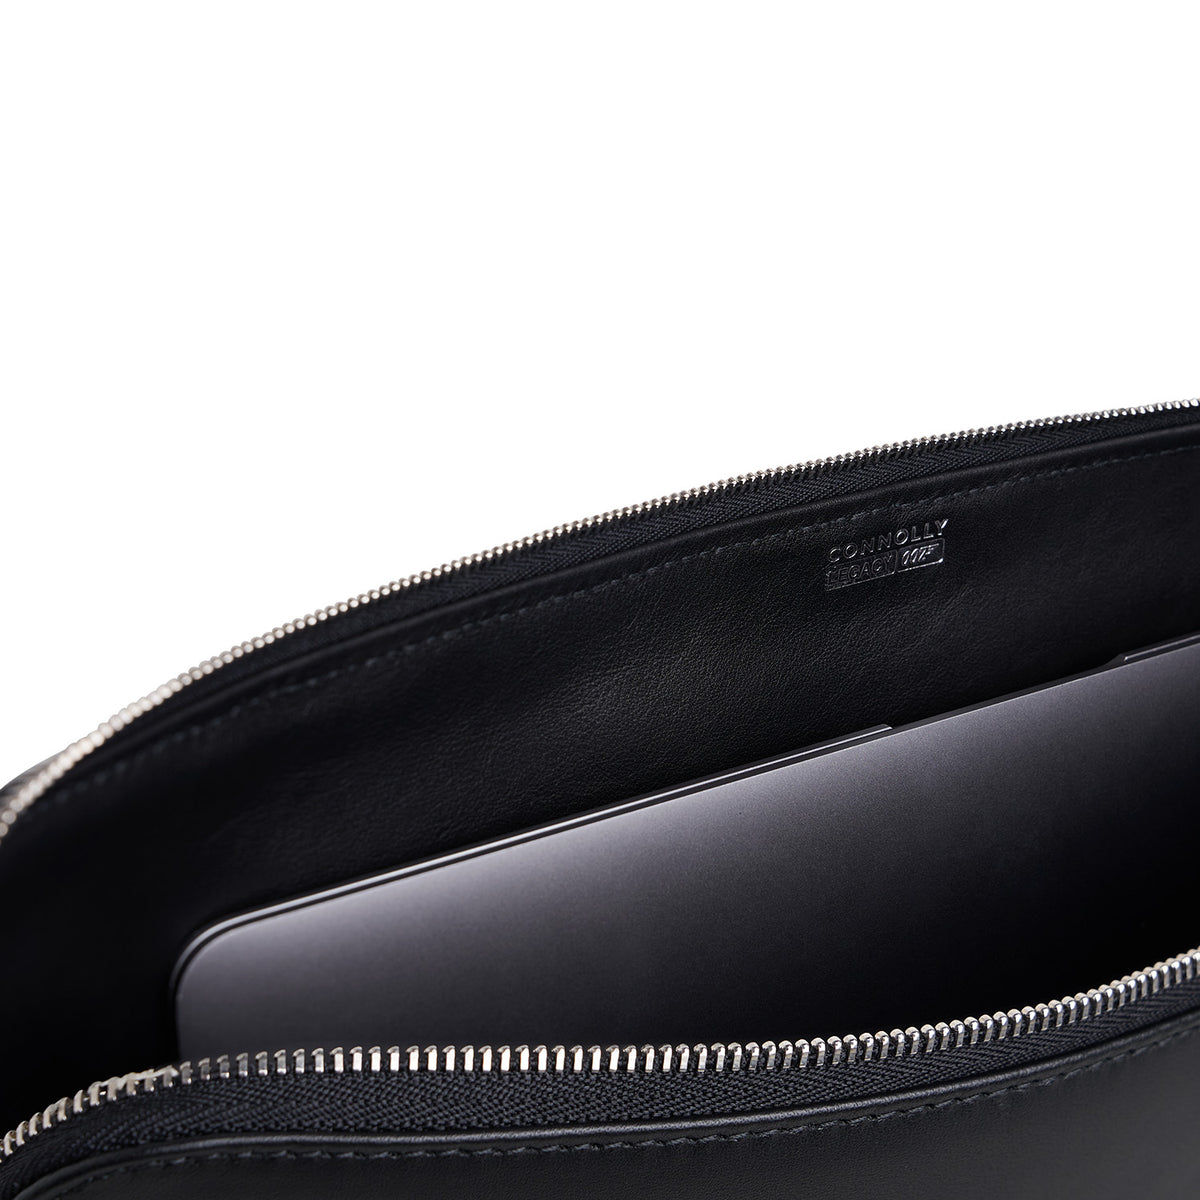 James Bond Leather Laptop Sleeve - By Connolly